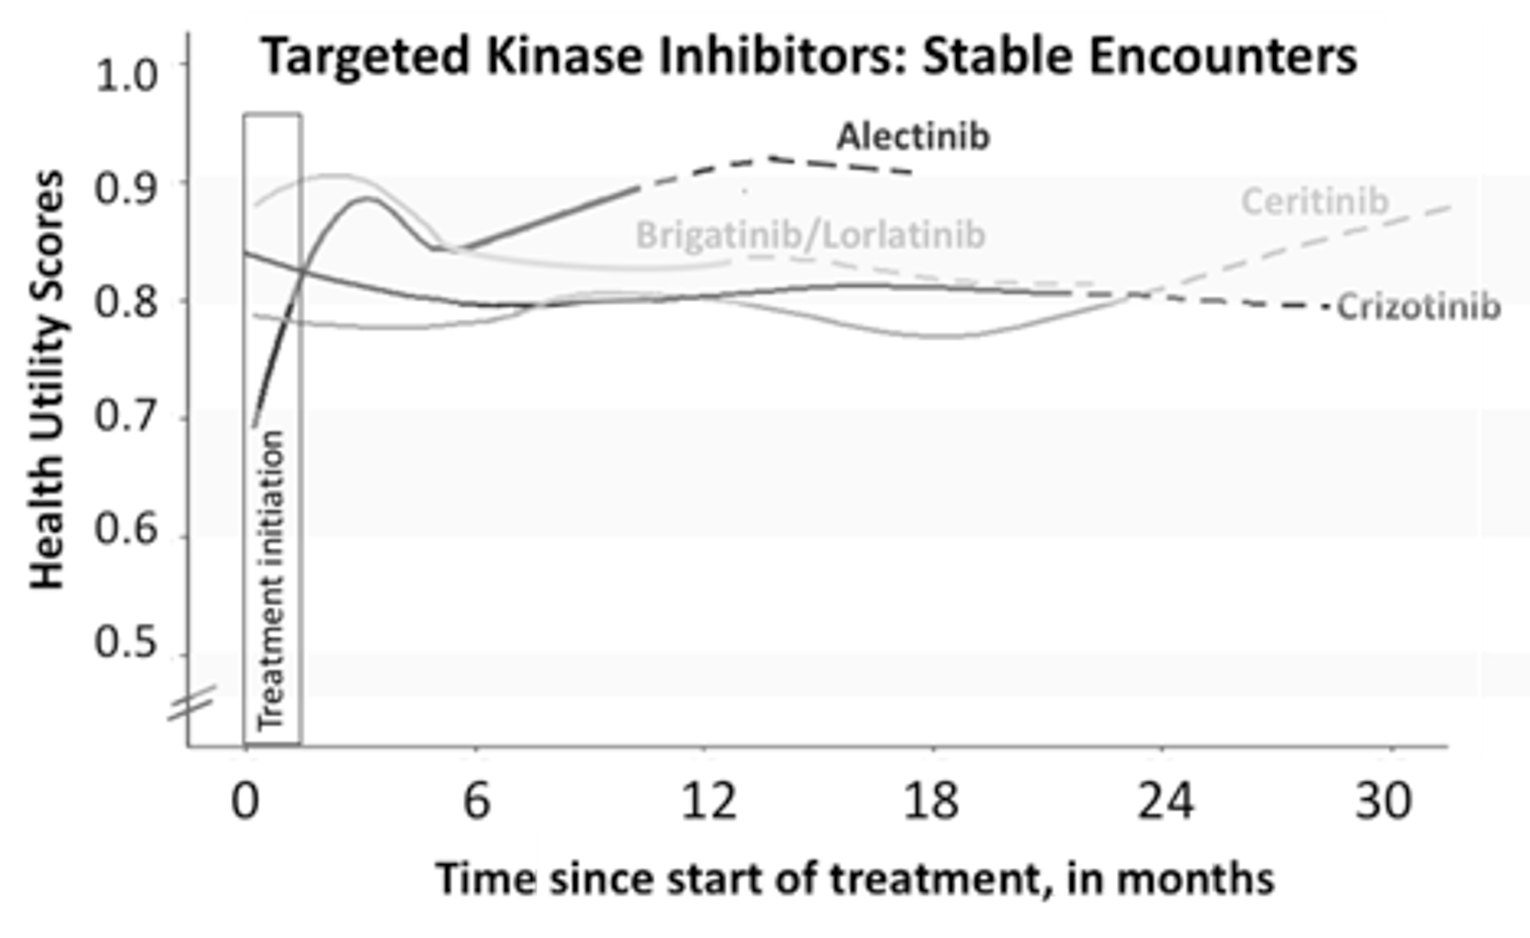 Mean Health Utility Scores (HUS) of Patients Over Time By Tyrosine Kinase Inhibitor Treatment While Clinically and Radiologically Stable on Their TKI Therapy. HUS Values in Each Treatment Group Were Modelled Using Locally Estimated Scatterplot Smoothing. When Fewer Than 15% of The Original Number of Patients Were Present, The Line Becomes Dotted To Reflect Potential Survivor Bias. The First 6 Weeks of Treatment Is Marked With A Box, “Treatment Initiation”, To Represent The Typical Length of Time Required For Patients To Respond To Therapy. Adapted From Tse BC Et Al, 2020 (Canadian PM Real-World Data)